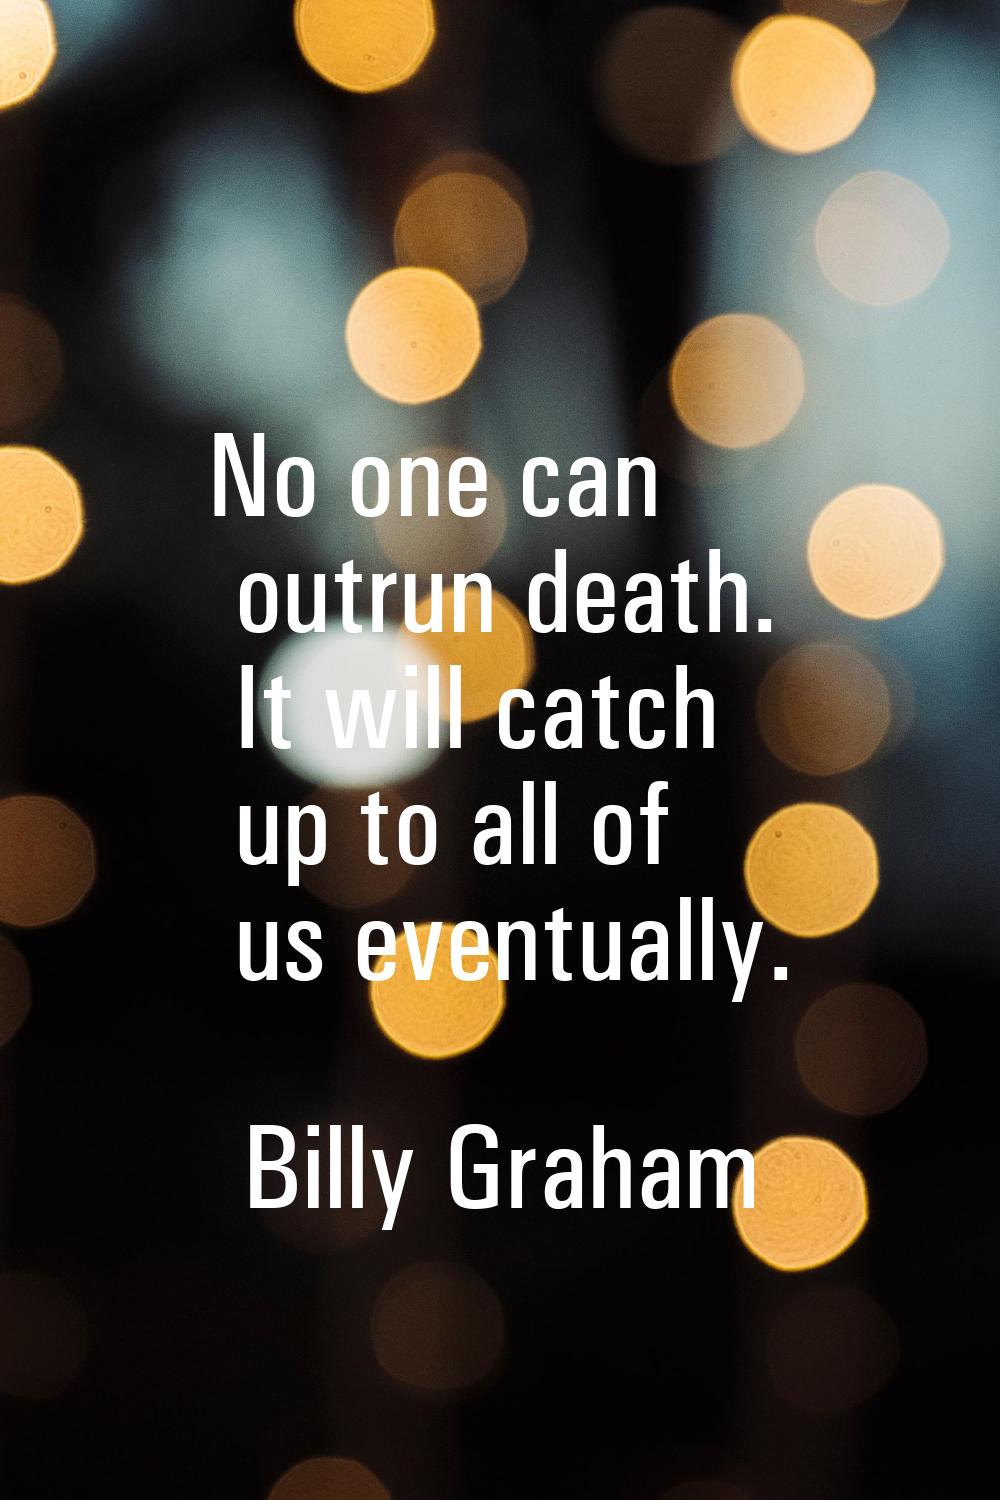 No one can outrun death. It will catch up to all of us eventually.